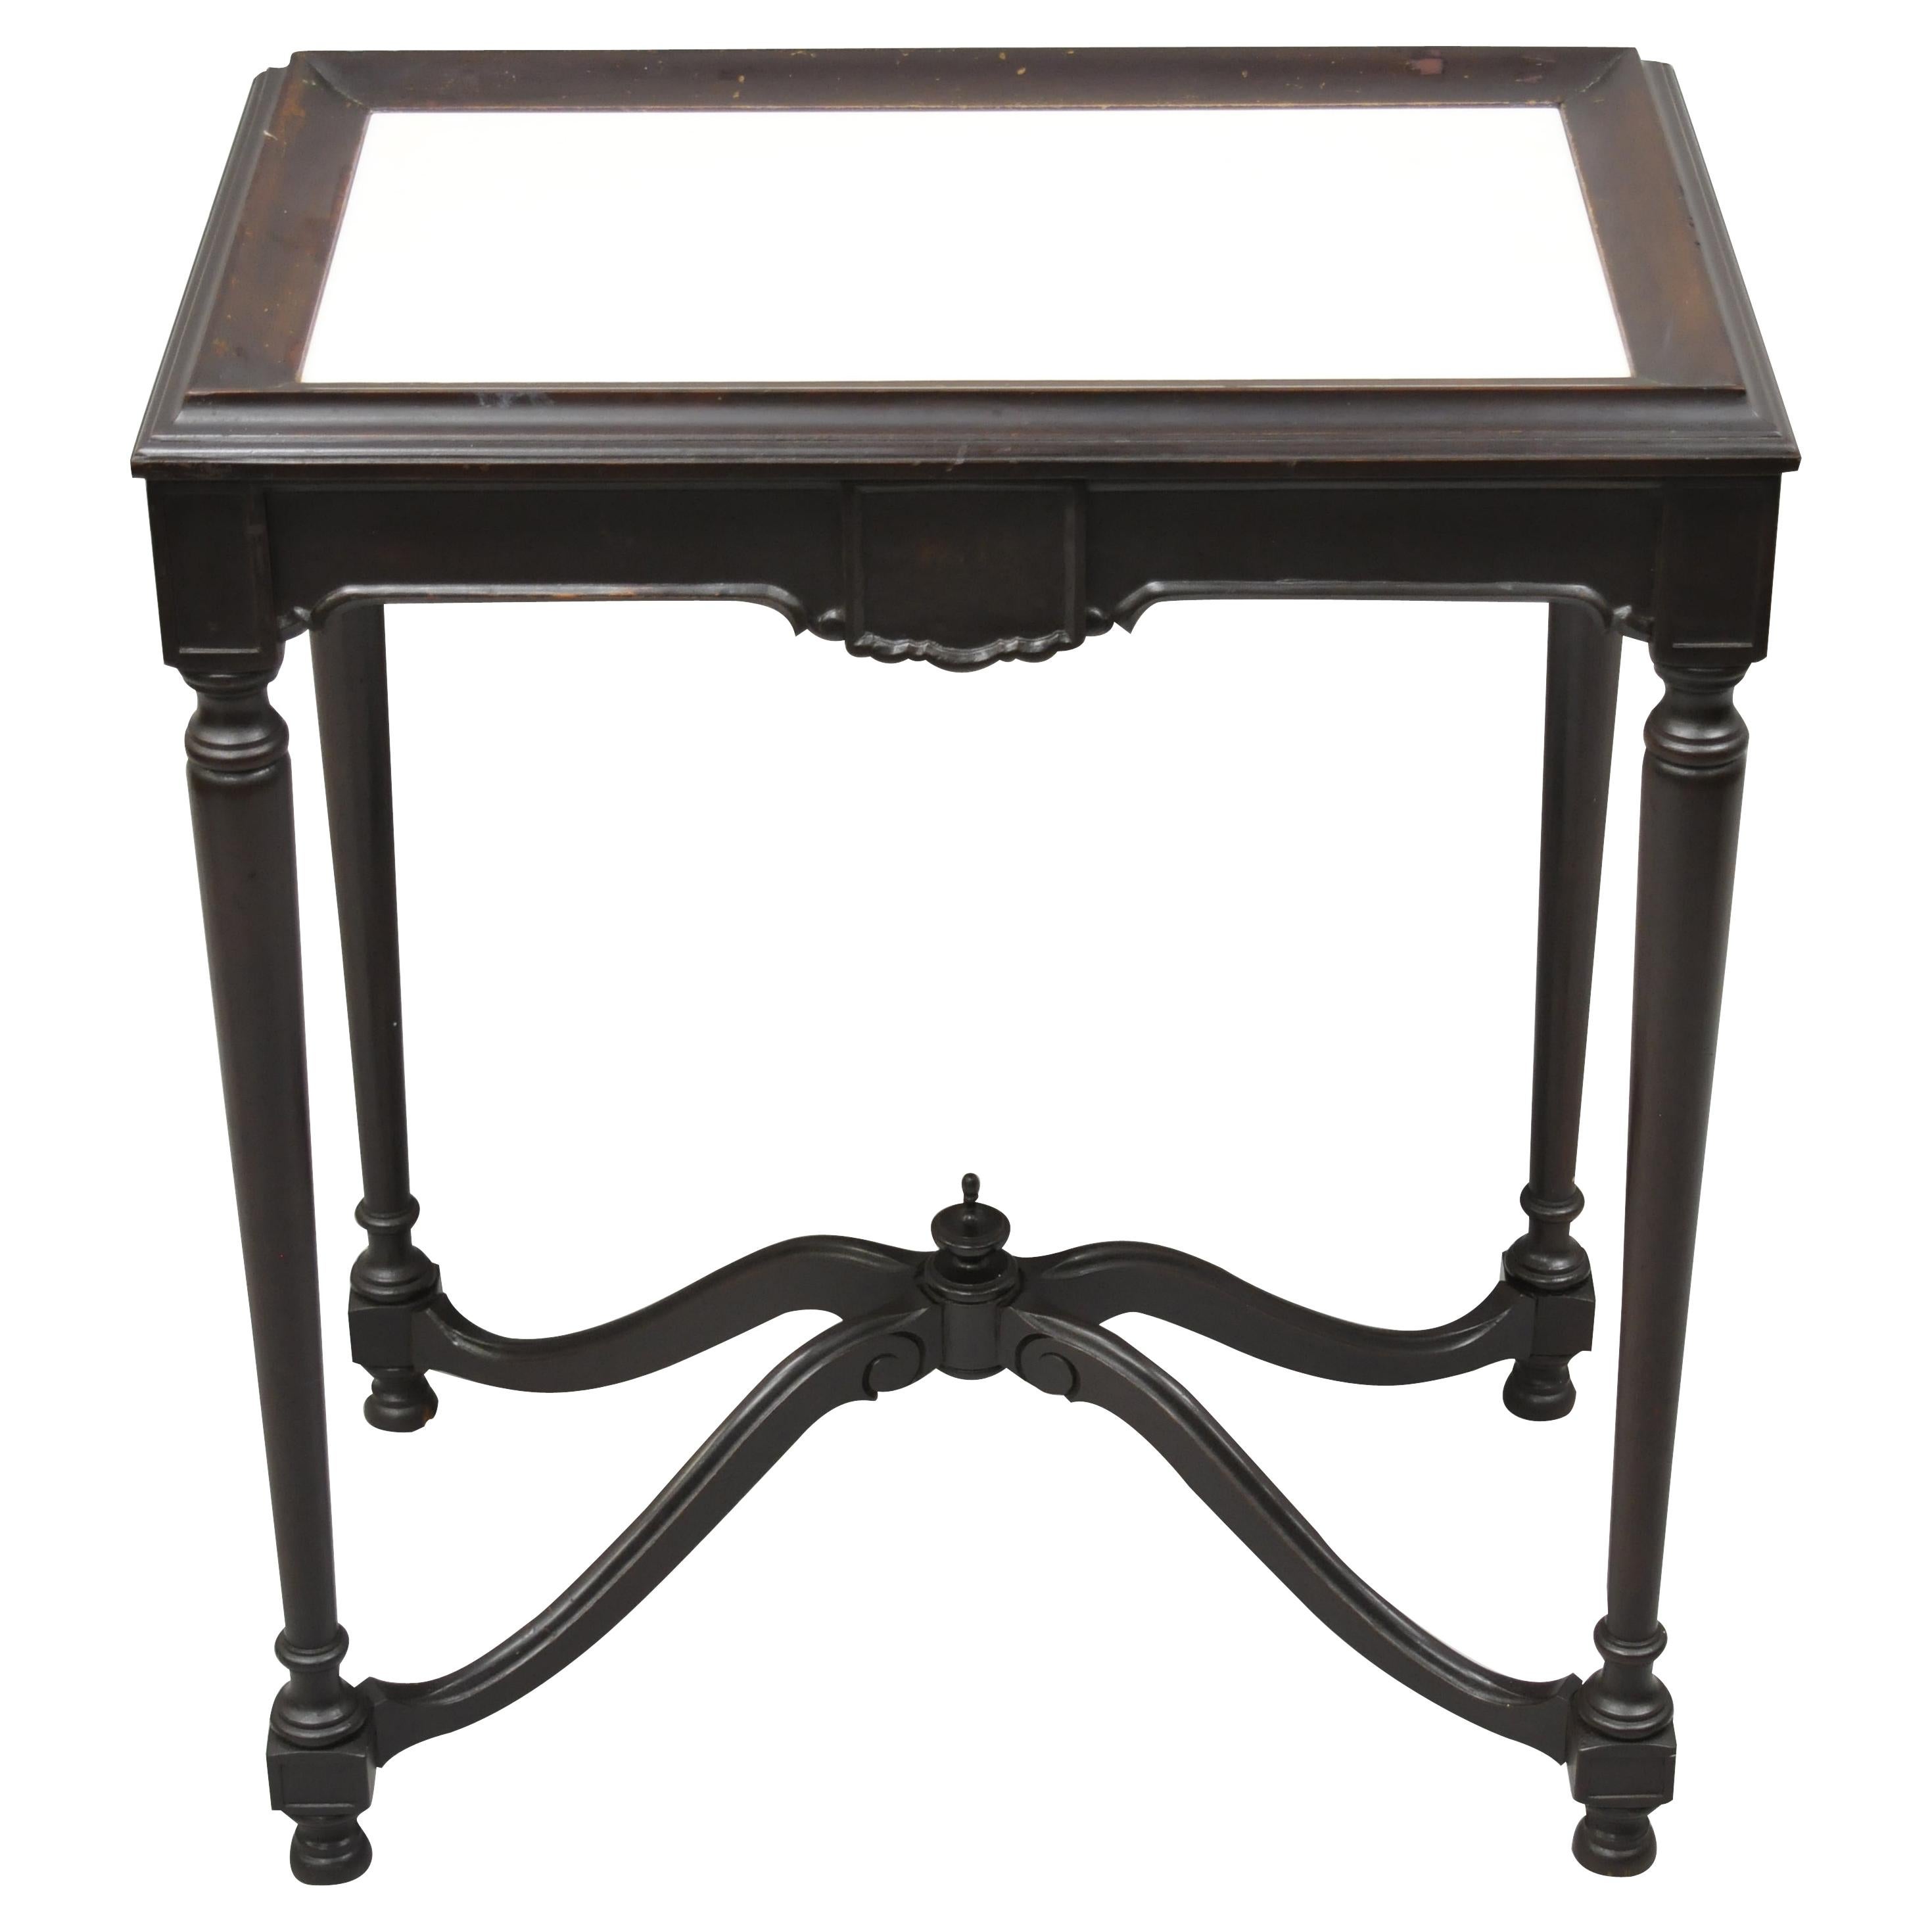 Antique Jacobean Renaissance Carved Mahogany Accent Side Table w/ Celluloid Top For Sale